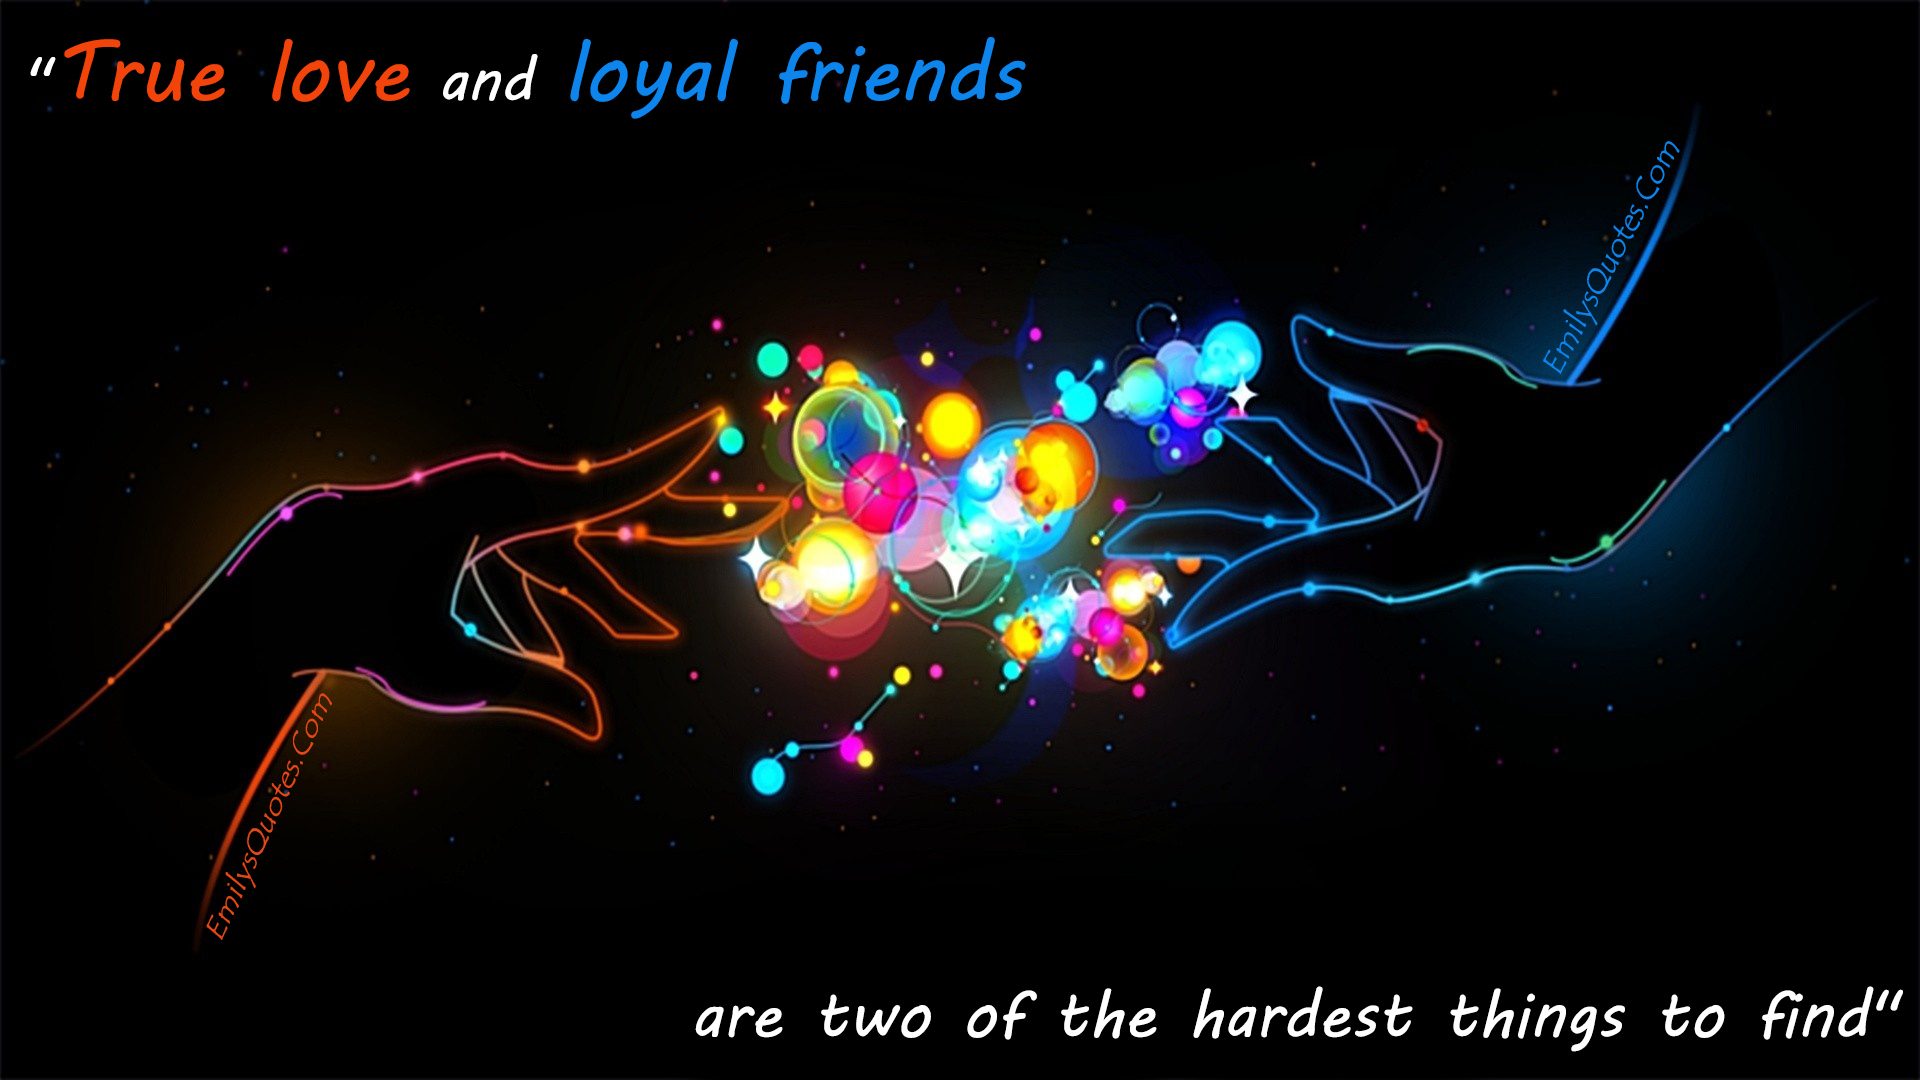 True love and loyal friends are two of the hardest things to find